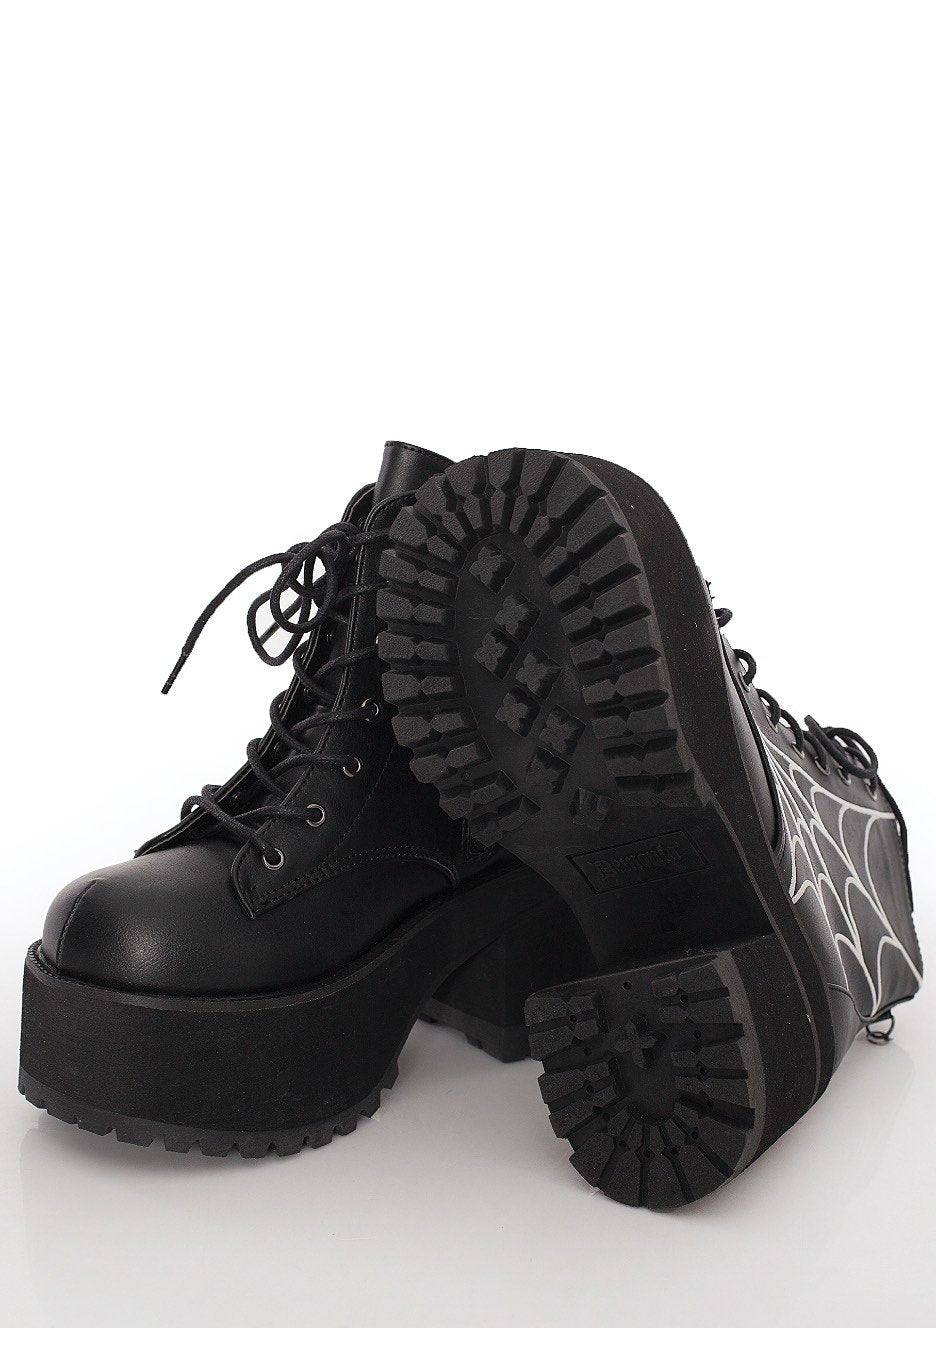 DemoniaCult - Ranger 105 Spider Web Embroidery - Girl Shoes